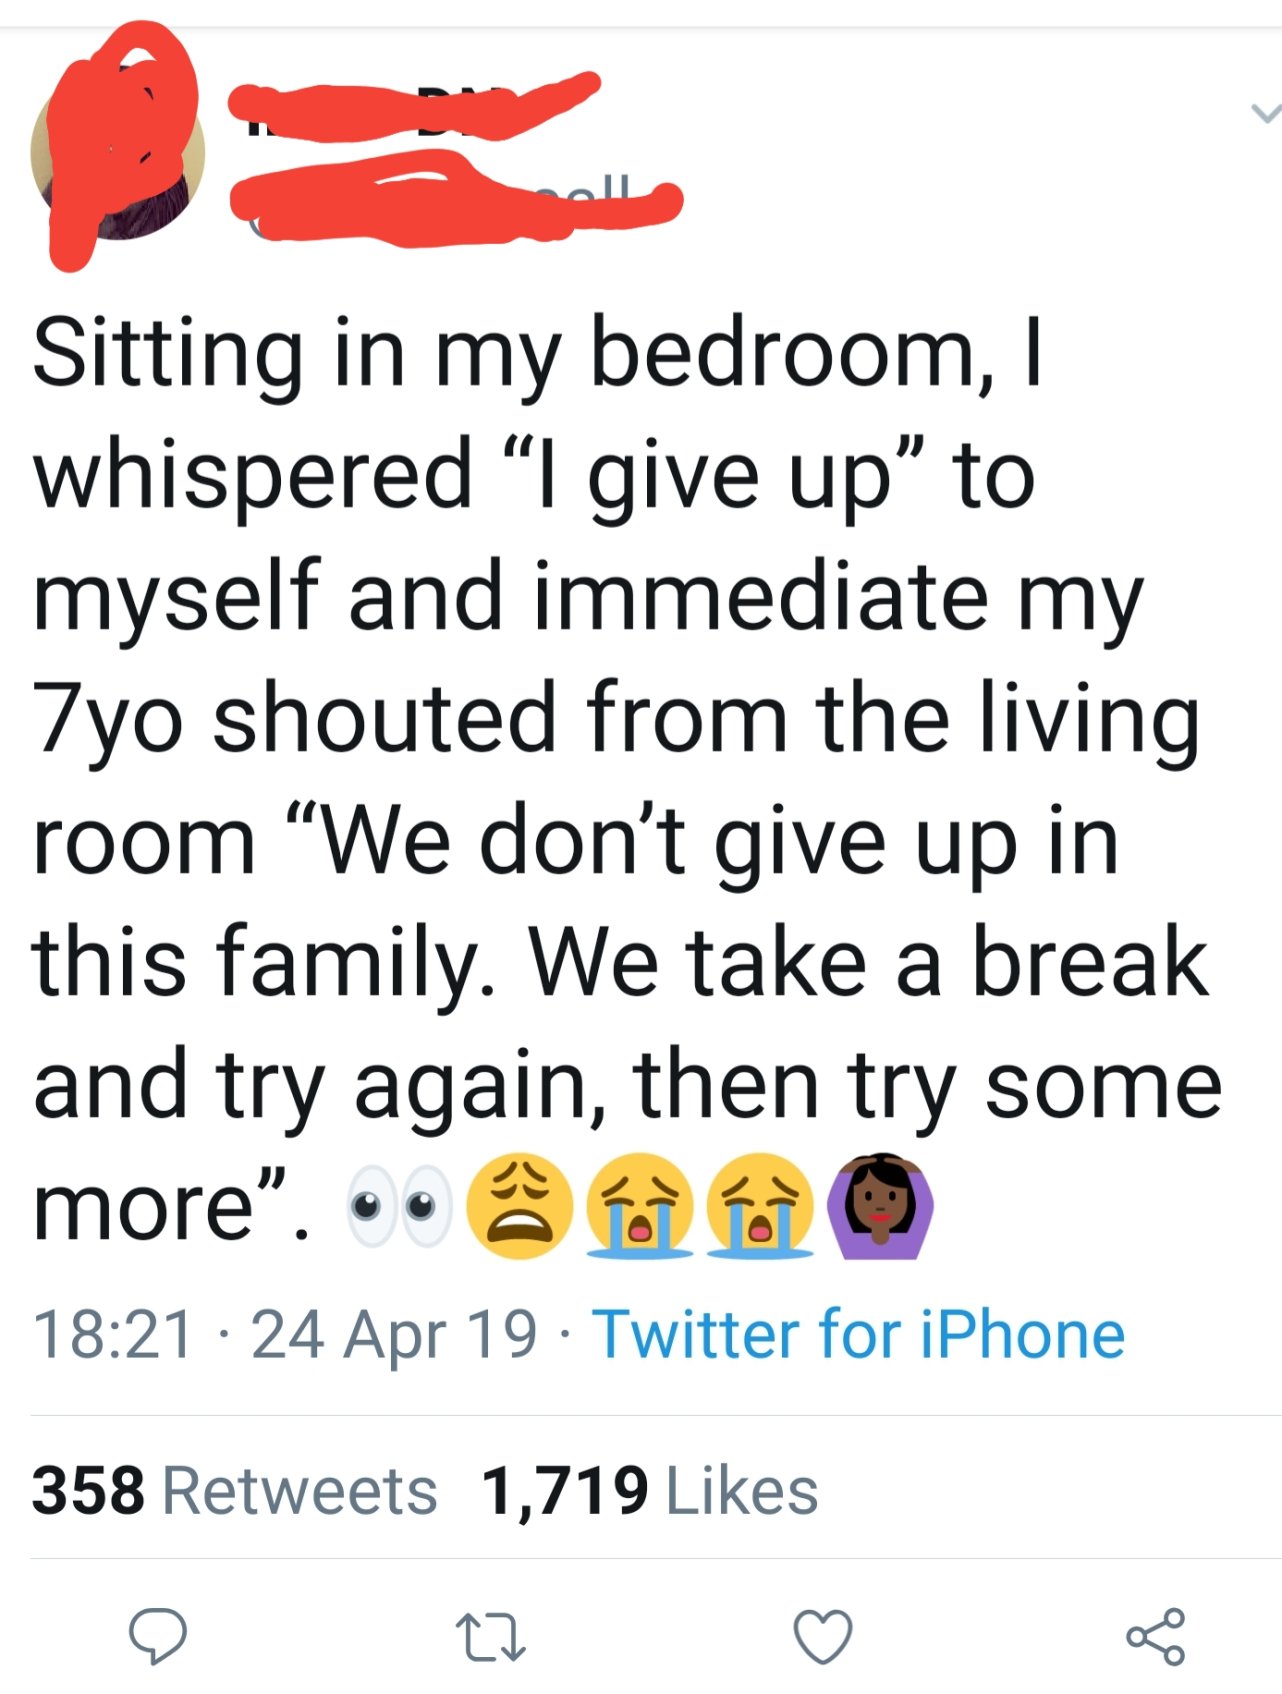 online liars- animal - Sitting in my bedroom, whispered "I give up to myself and immediate my 7yo shouted from the living room We don't give up in this family. We take a break and try again, then try some more". . ad 24 Apr 19. Twitter for iPhone 358 1,71